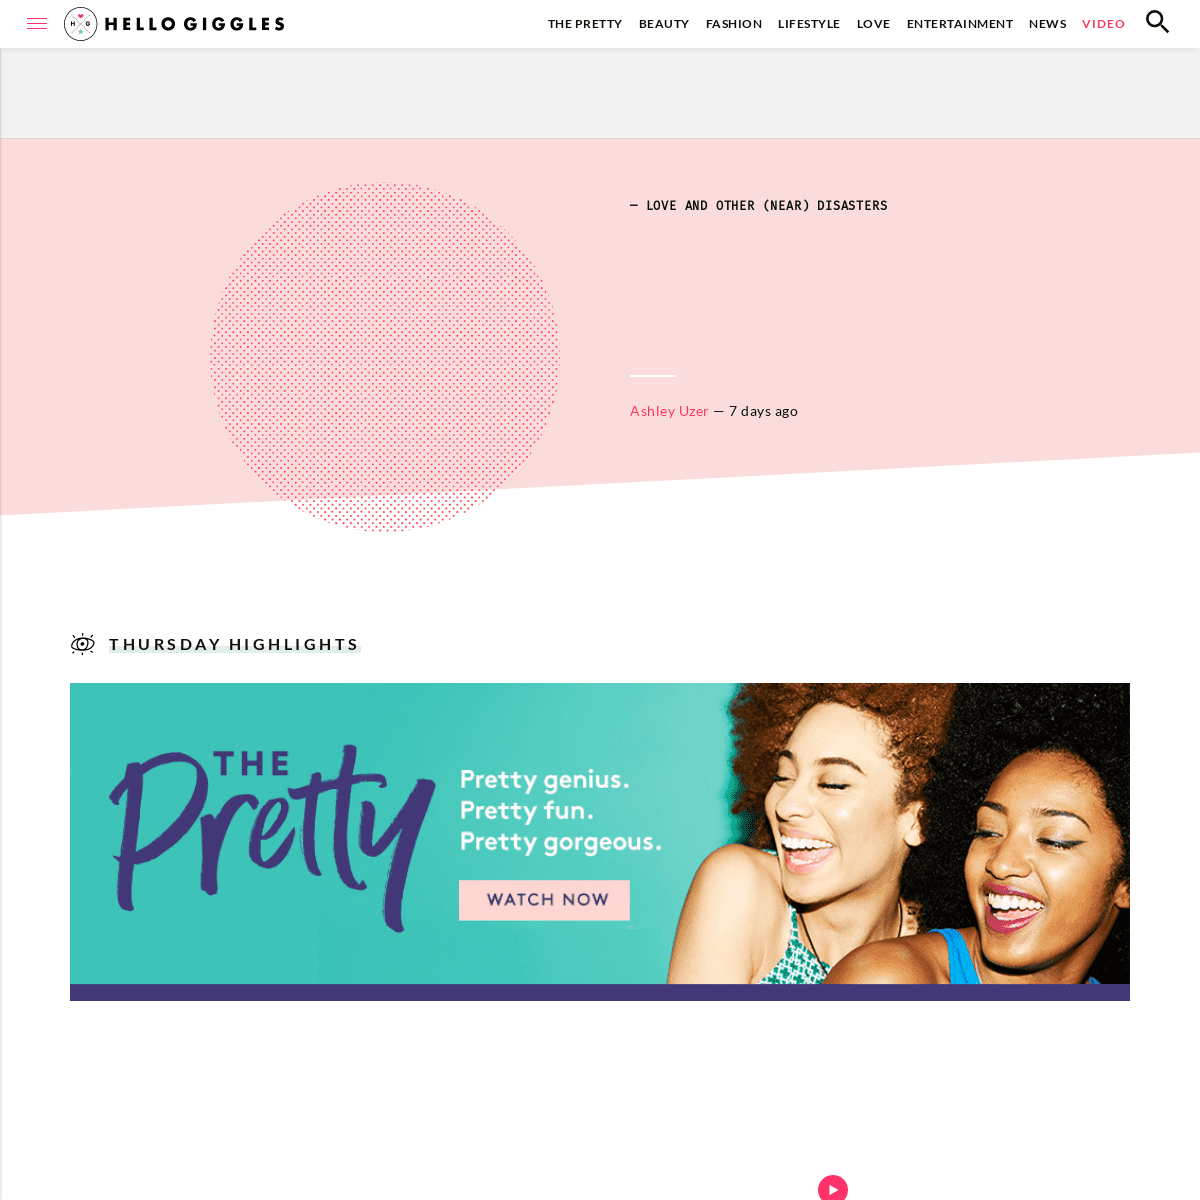 HelloGiggles: a Positive Community for Women